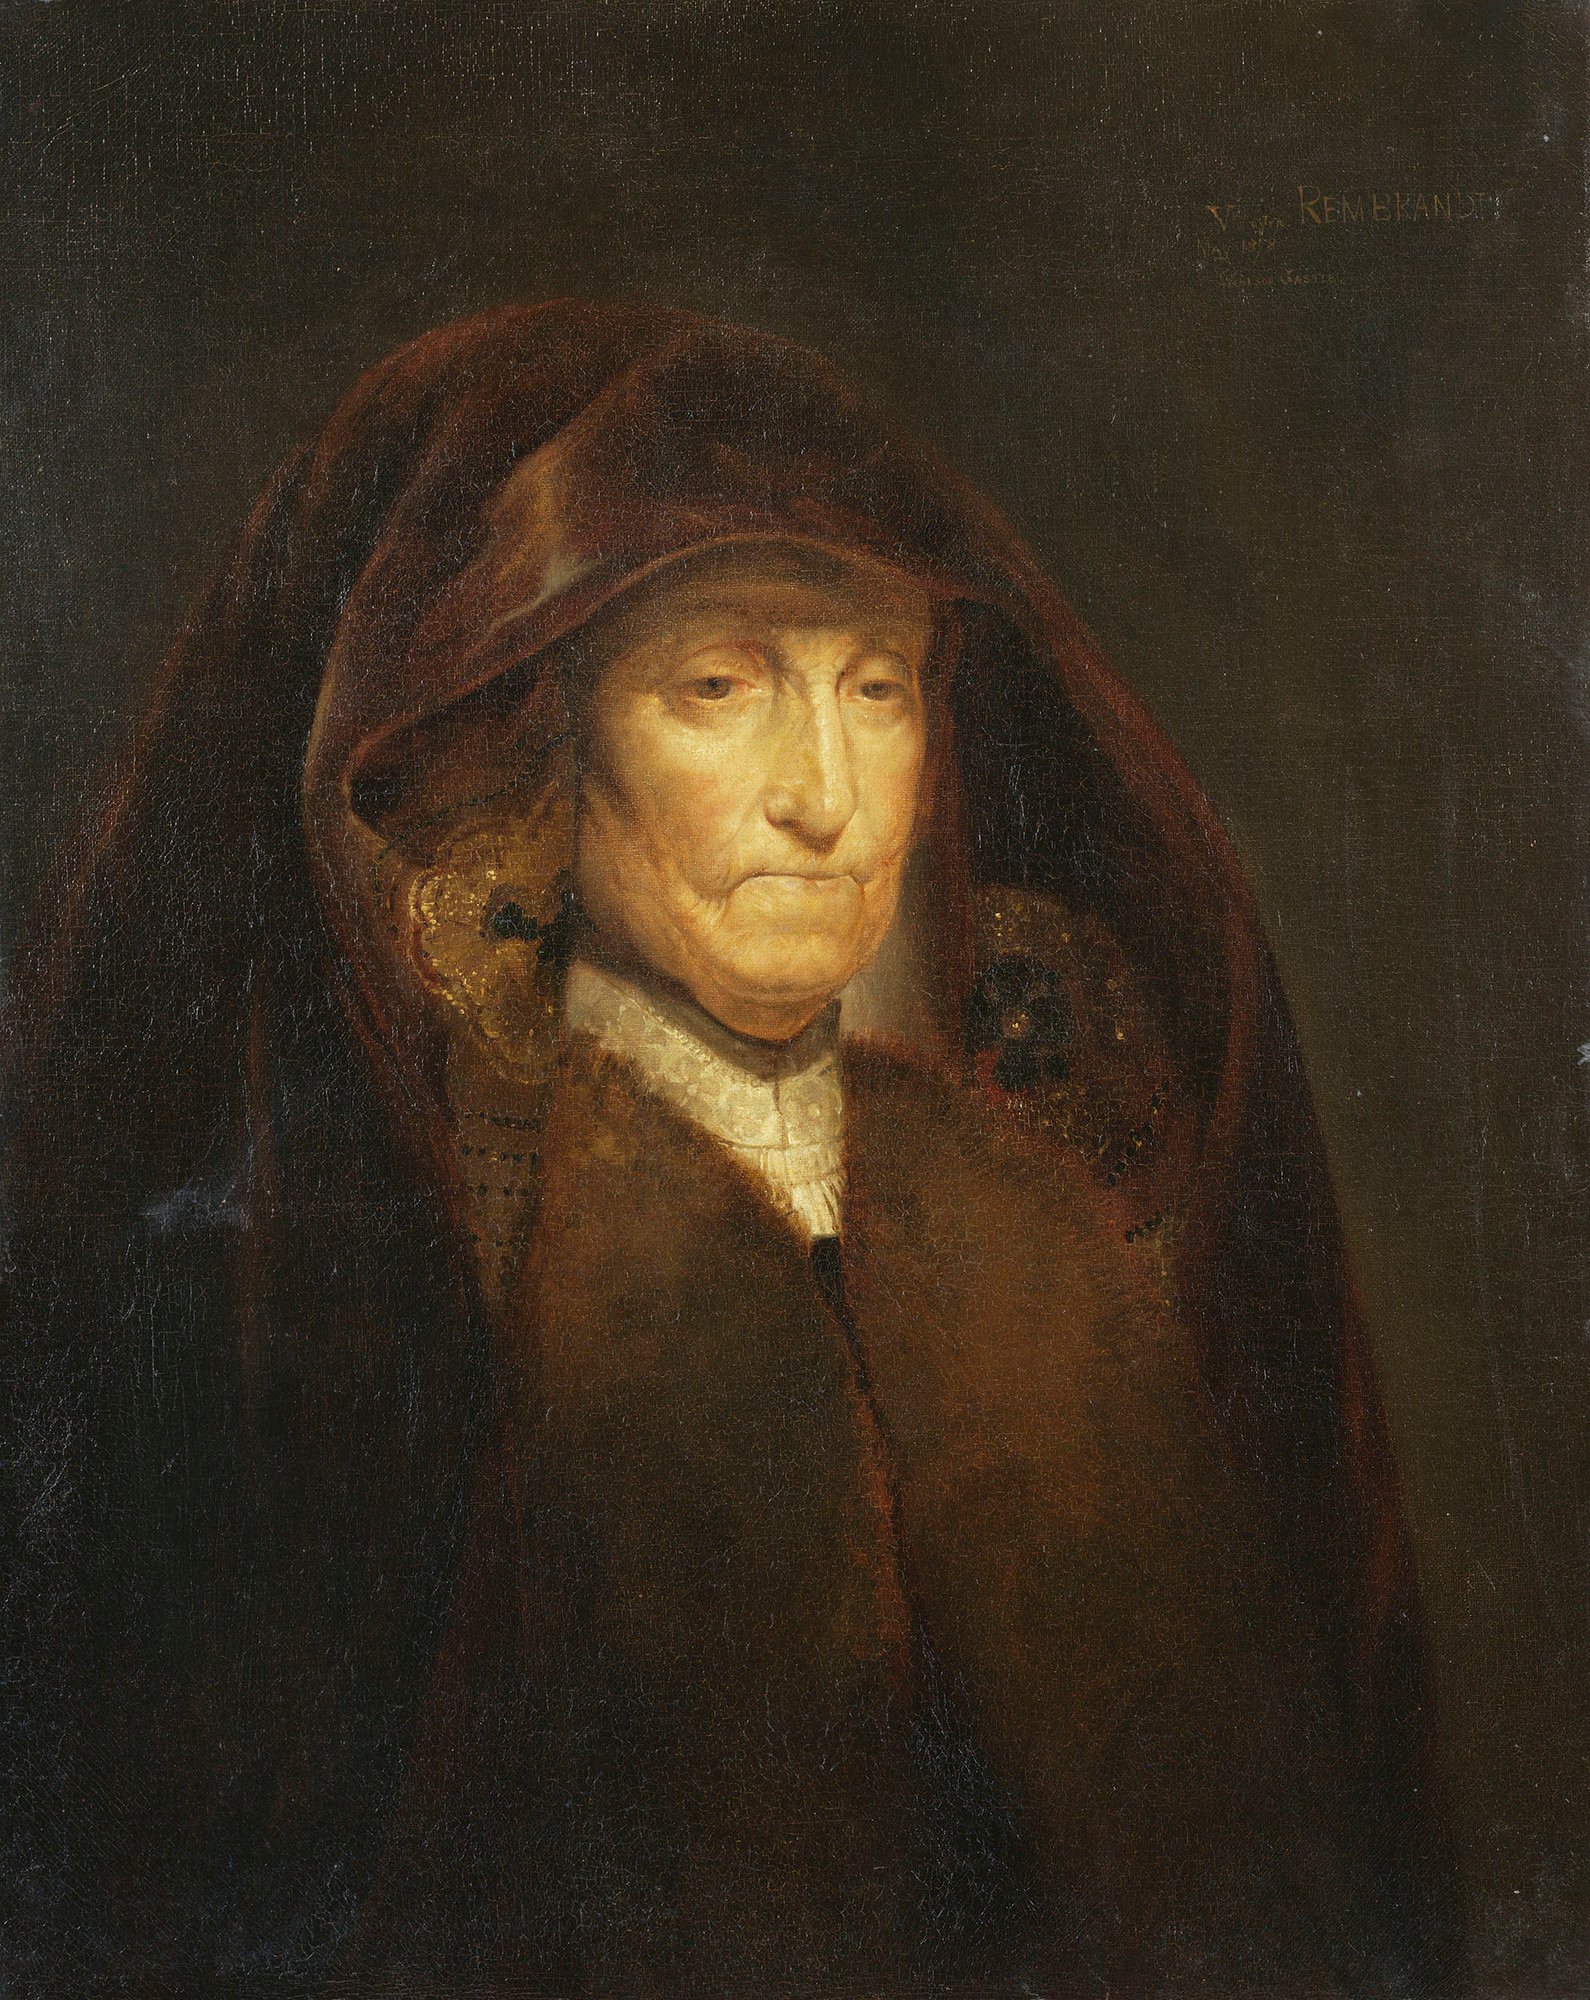 This is a copy after Rembrandt's 'Old Woman' (then referred to as 'The Artist's Mother'), which is still in the Royal Collection (RCIN 405000). The artist-Princess has captured the technique and spirit of Rembrandt's original to a remarkable extent.